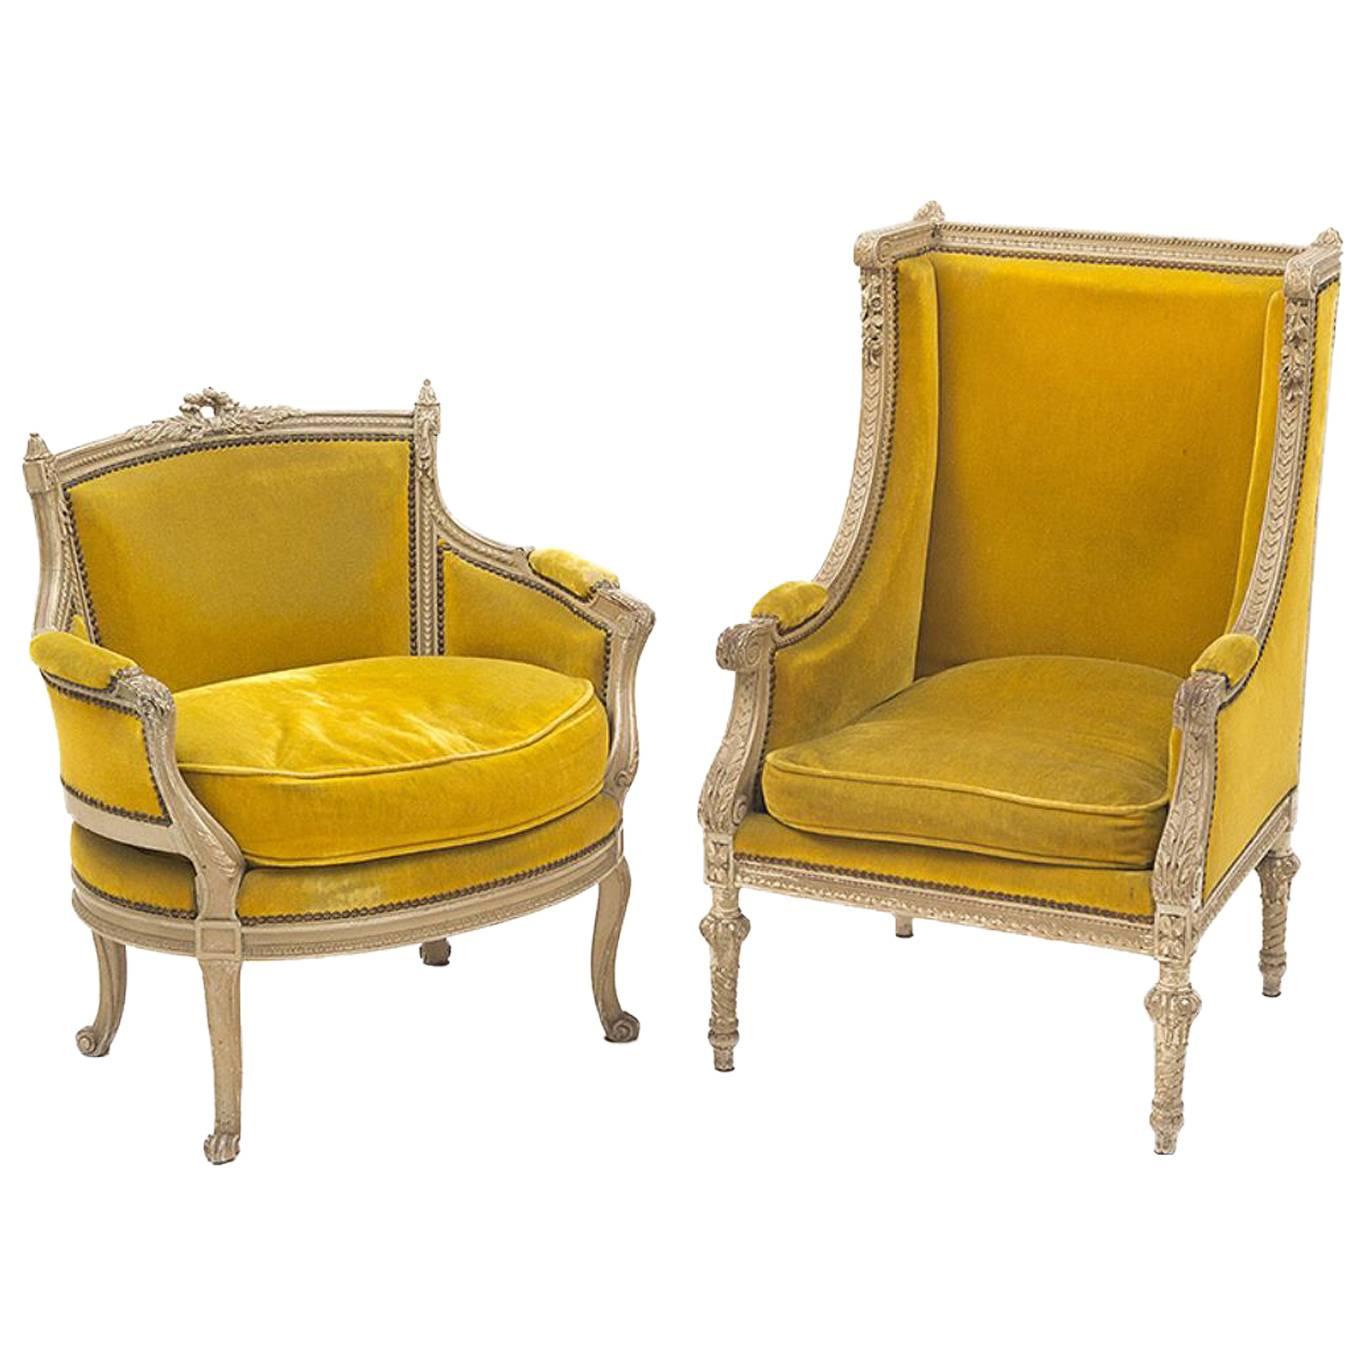 19th Century Louis XVI Painted Bergère and Marquise from France